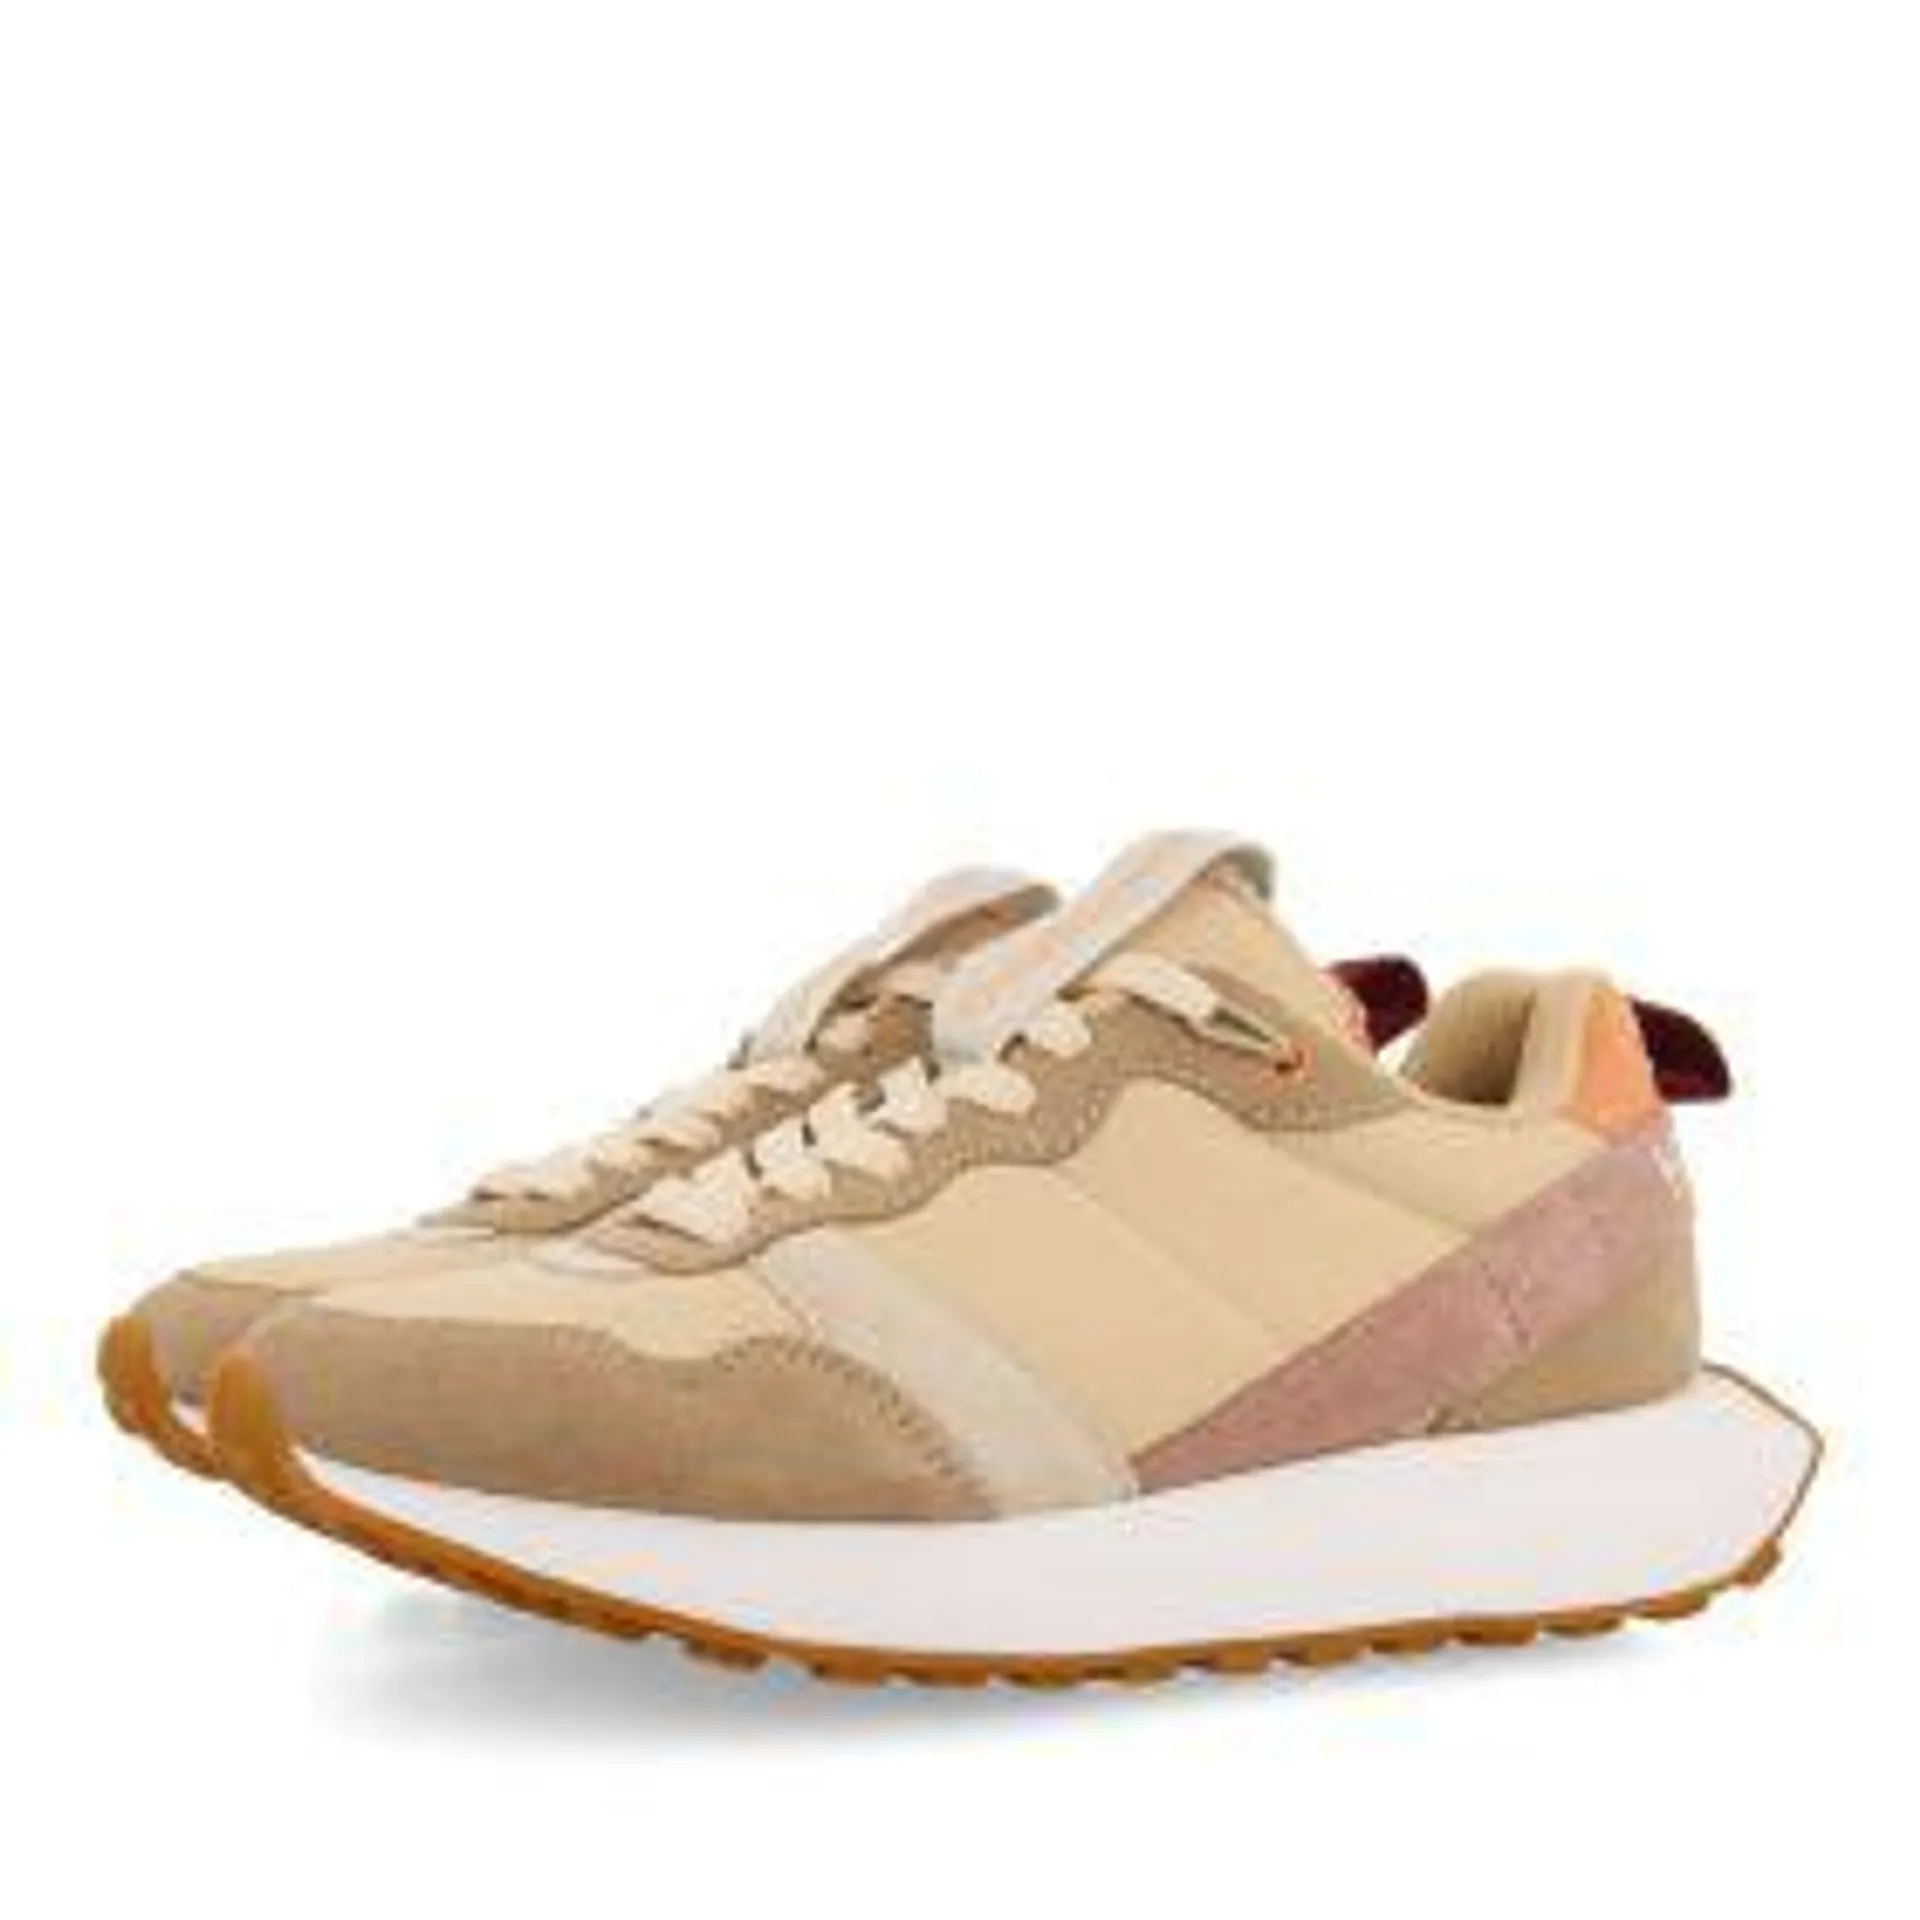 Chacao women's beige retro-style sneakers with multicoloured details